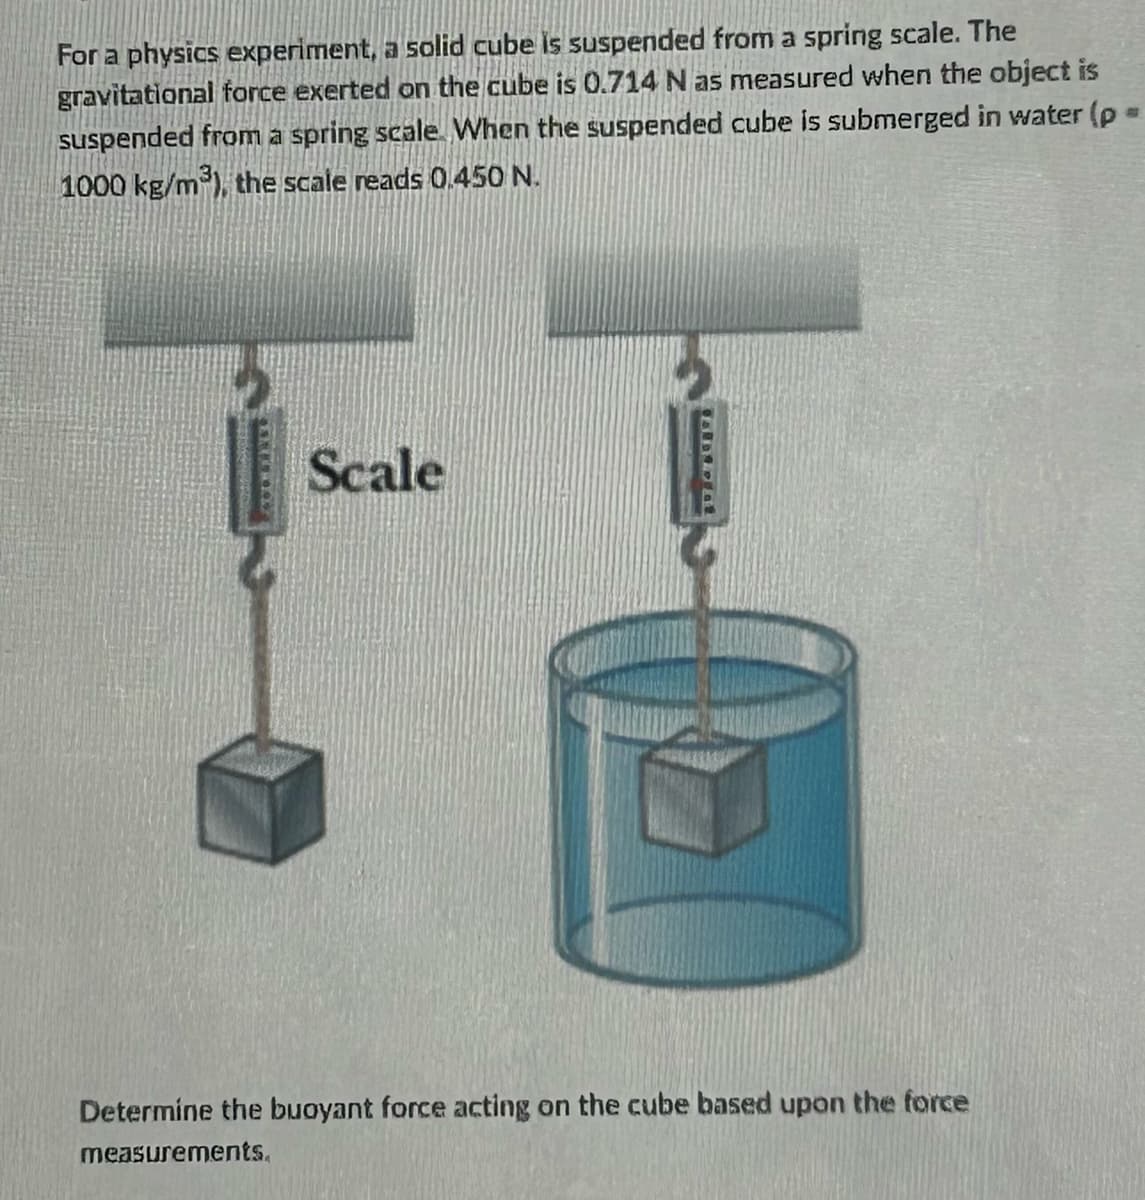 For a physics experiment, a solid cube is suspended from a spring scale. The
gravitational force exerted on the cube is 0.714 N as measured when the object is
suspended from a spring scale. When the suspended cube is submerged in water (p
1000 kg/m³), the scale reads 0.450 N.
Scale
Determine the buoyant force acting on the cube based upon the force
measurements.